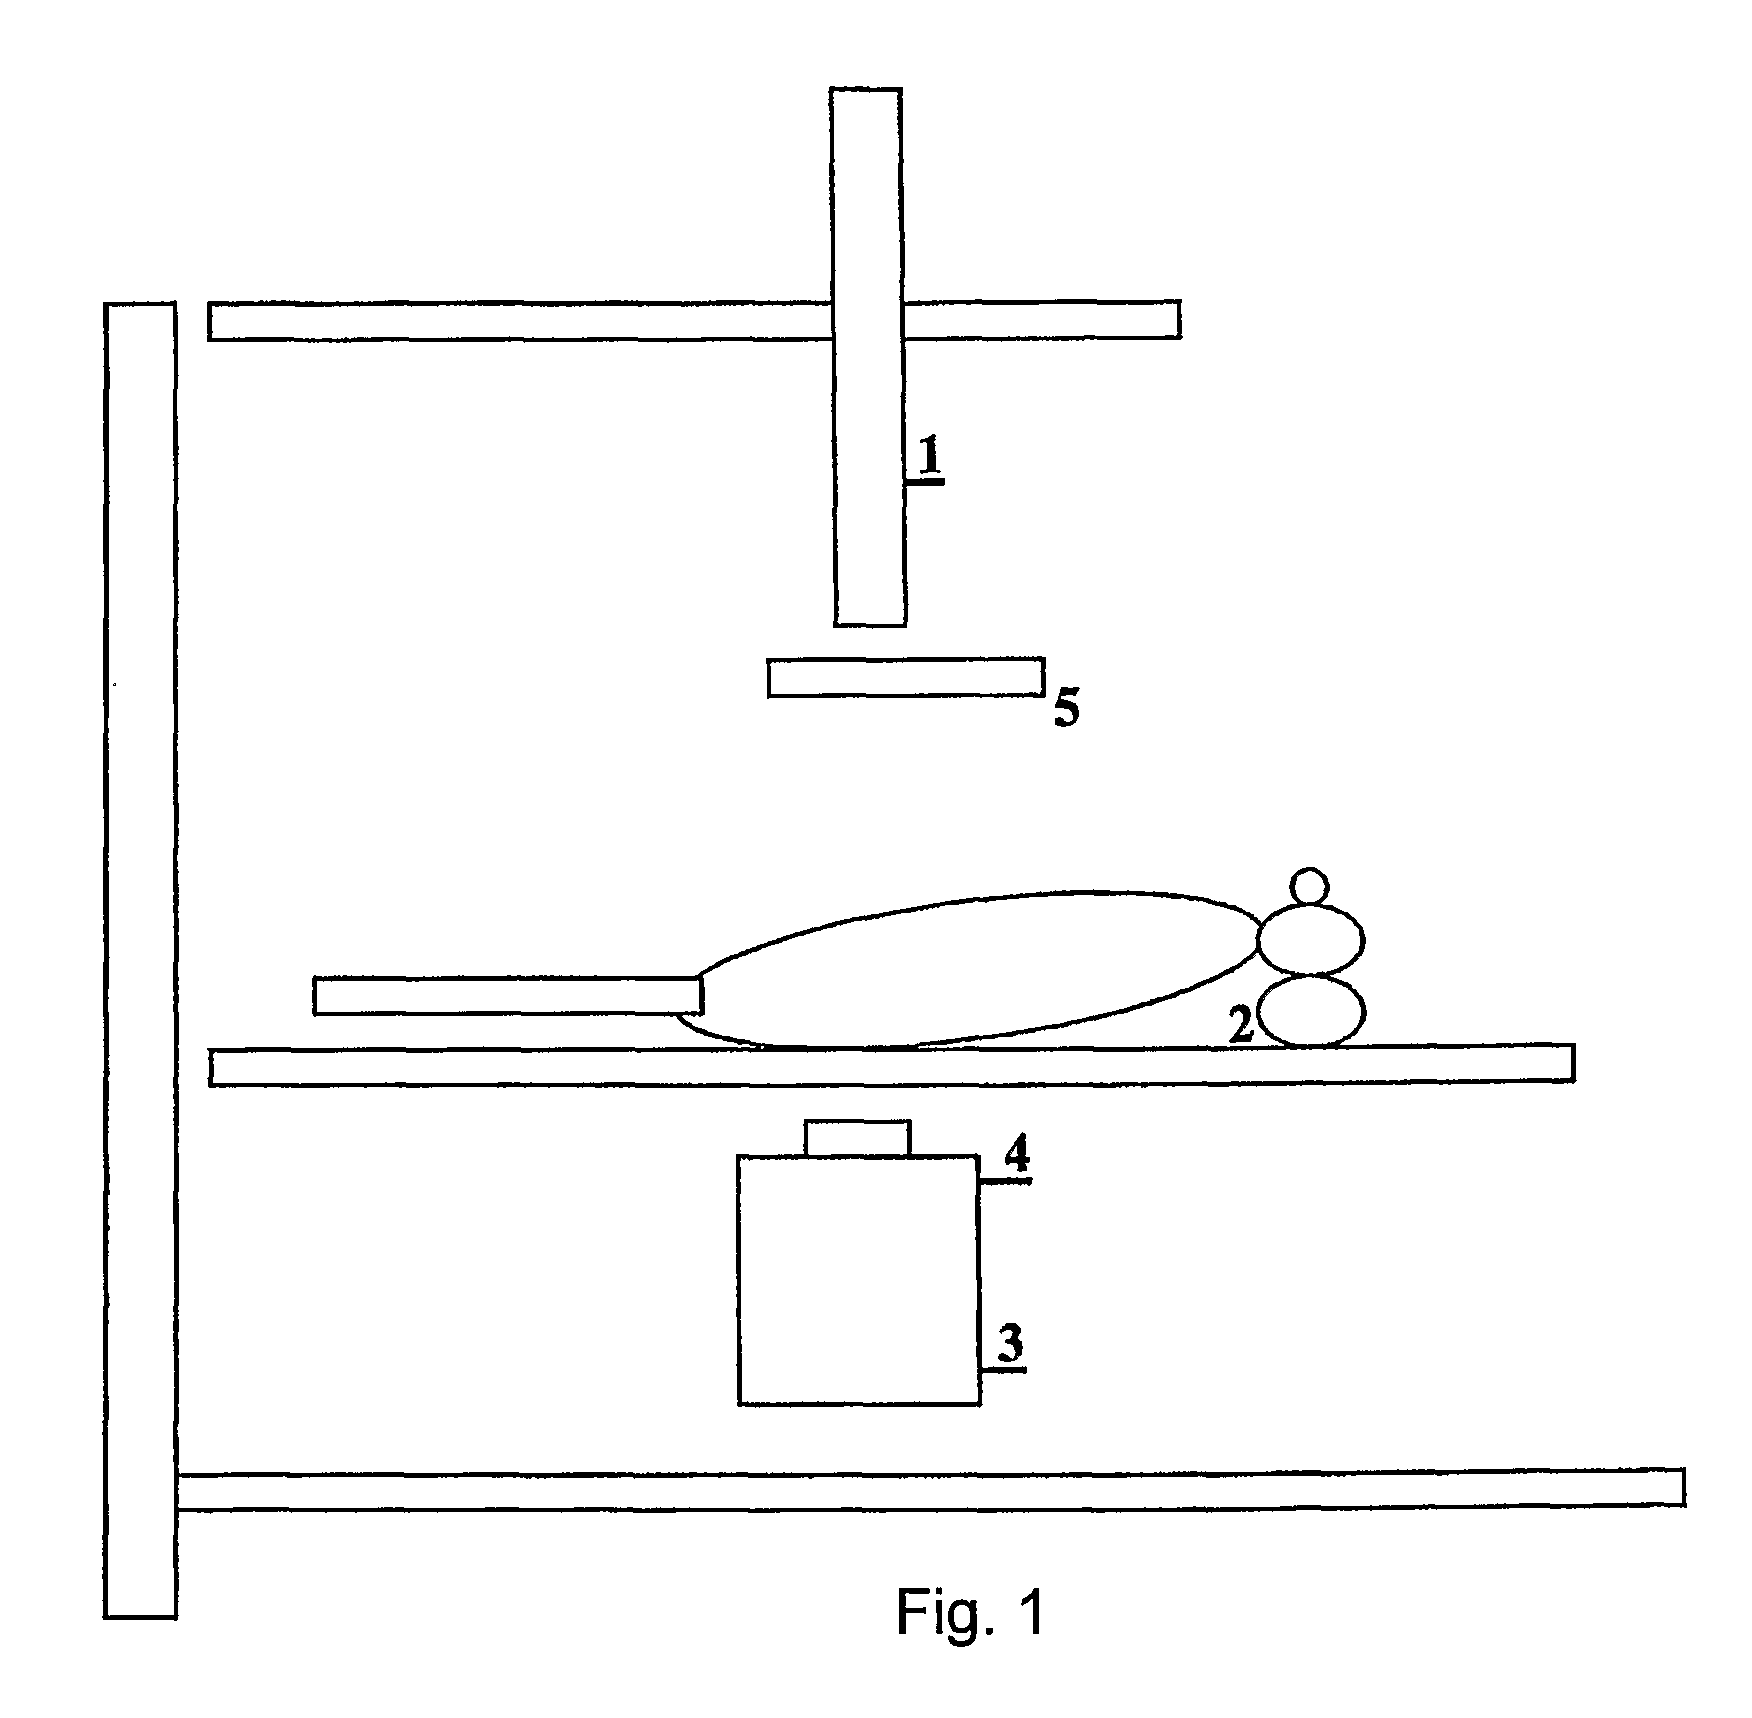 Method for reducing exposure to infrared light beam, ultrasound or magnetic impulse rays in medical imaging devices